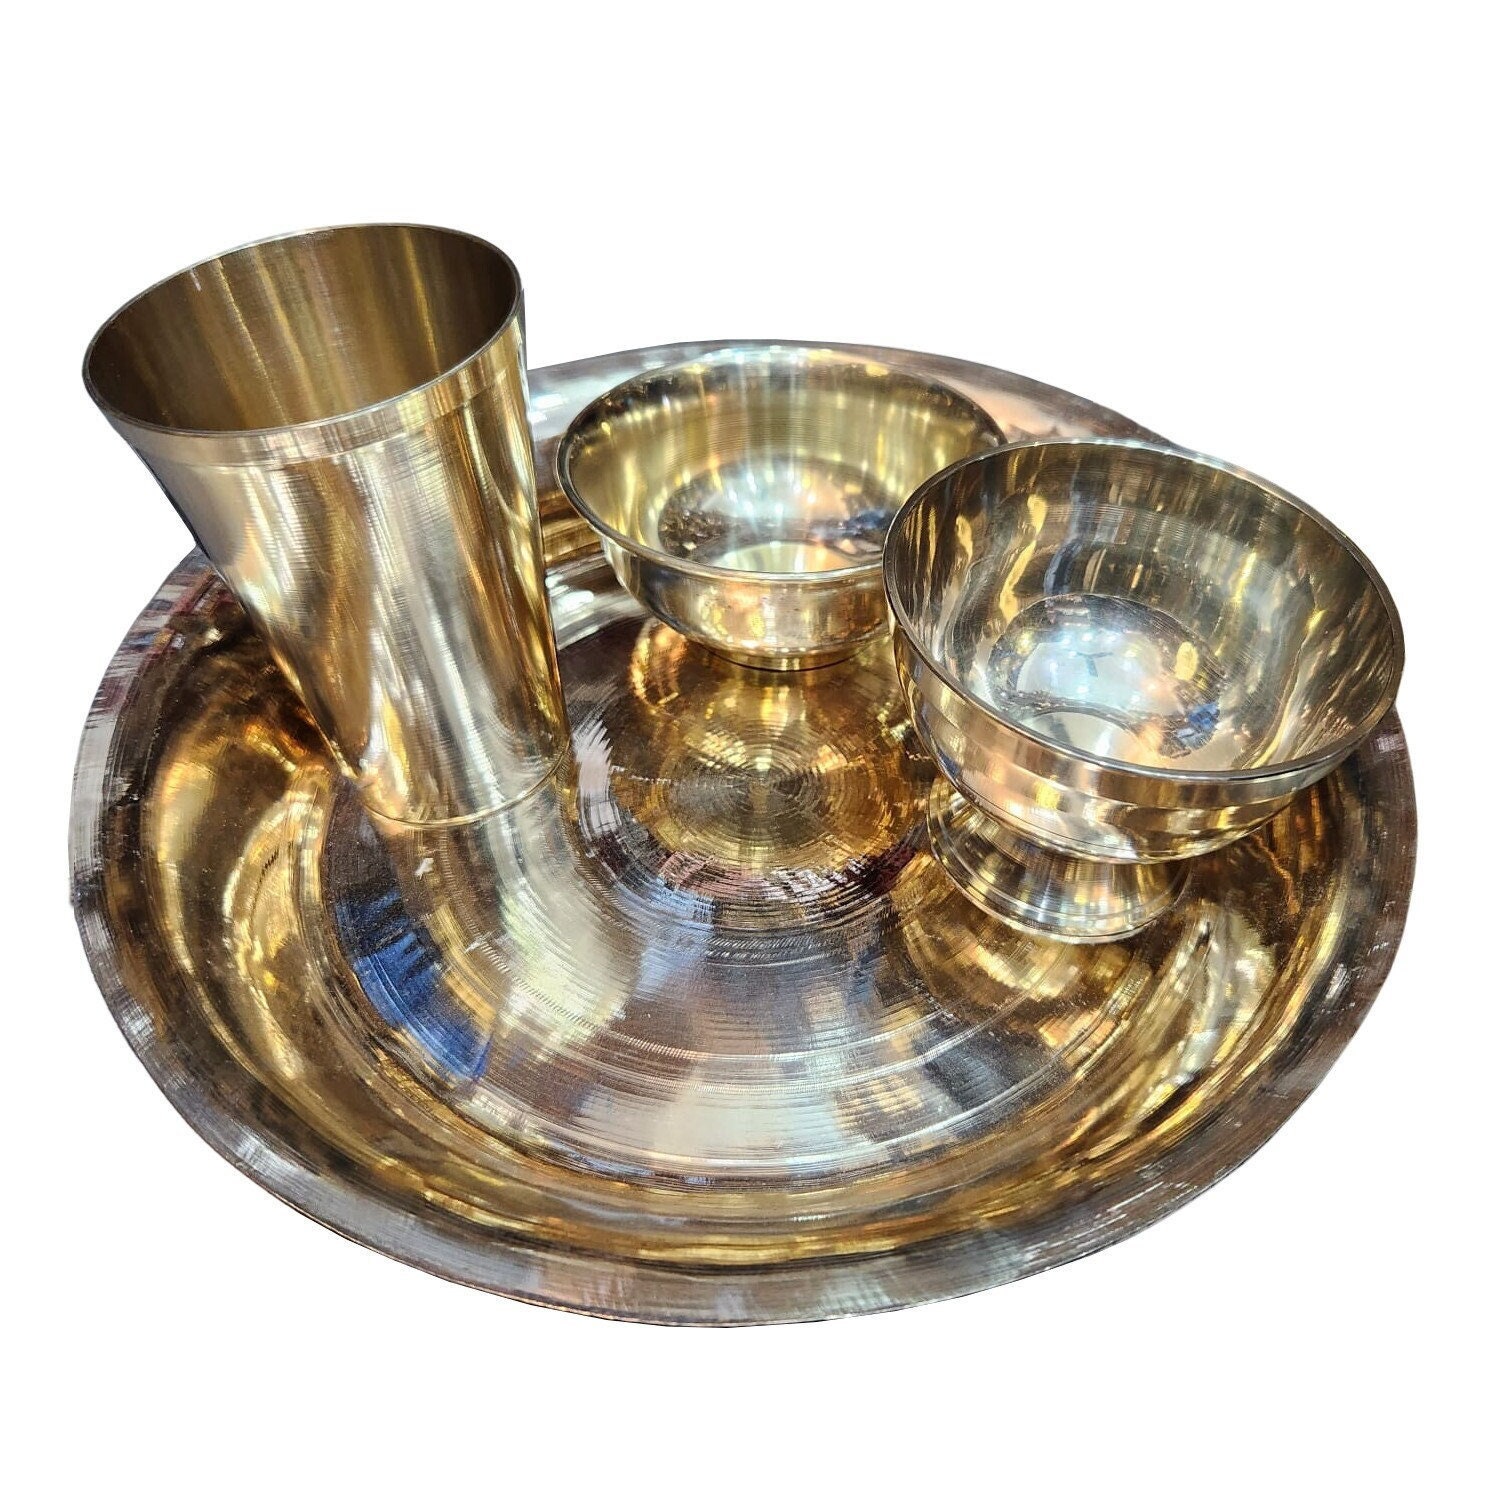 Pure Brass Hammered Design 7 Pieces Dinner Setthali Set of 1 Plate, 1  Glass, 1 Spoon, 1 Small Plate & 3 Bowls Color Gold 